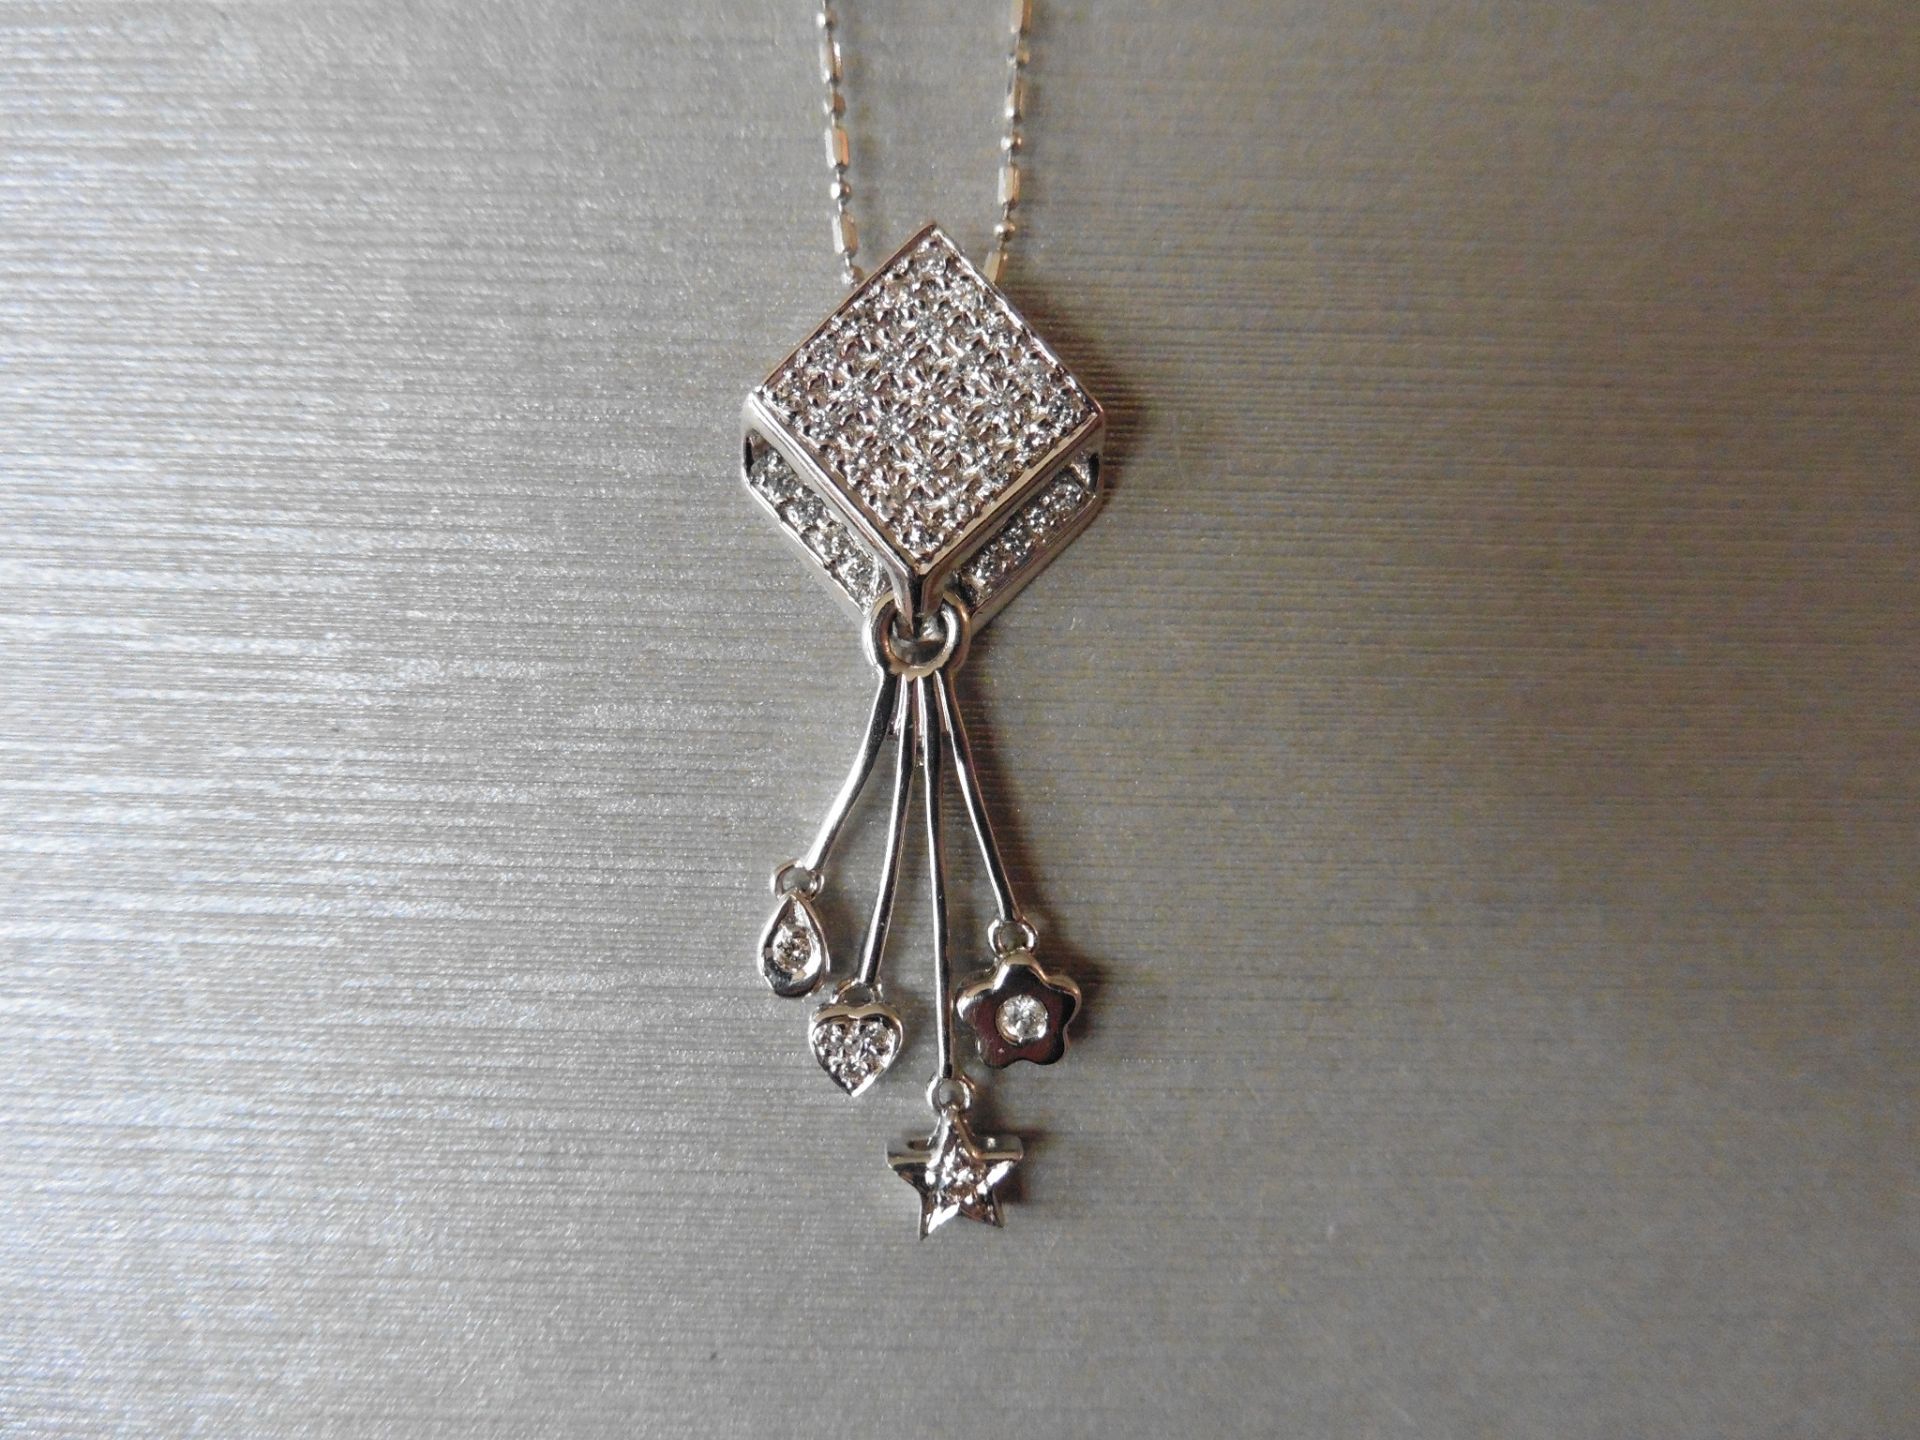 18ct white gold fancy drop pendant. Diamond shaped design at the top which is micro set with tiny - Image 5 of 5